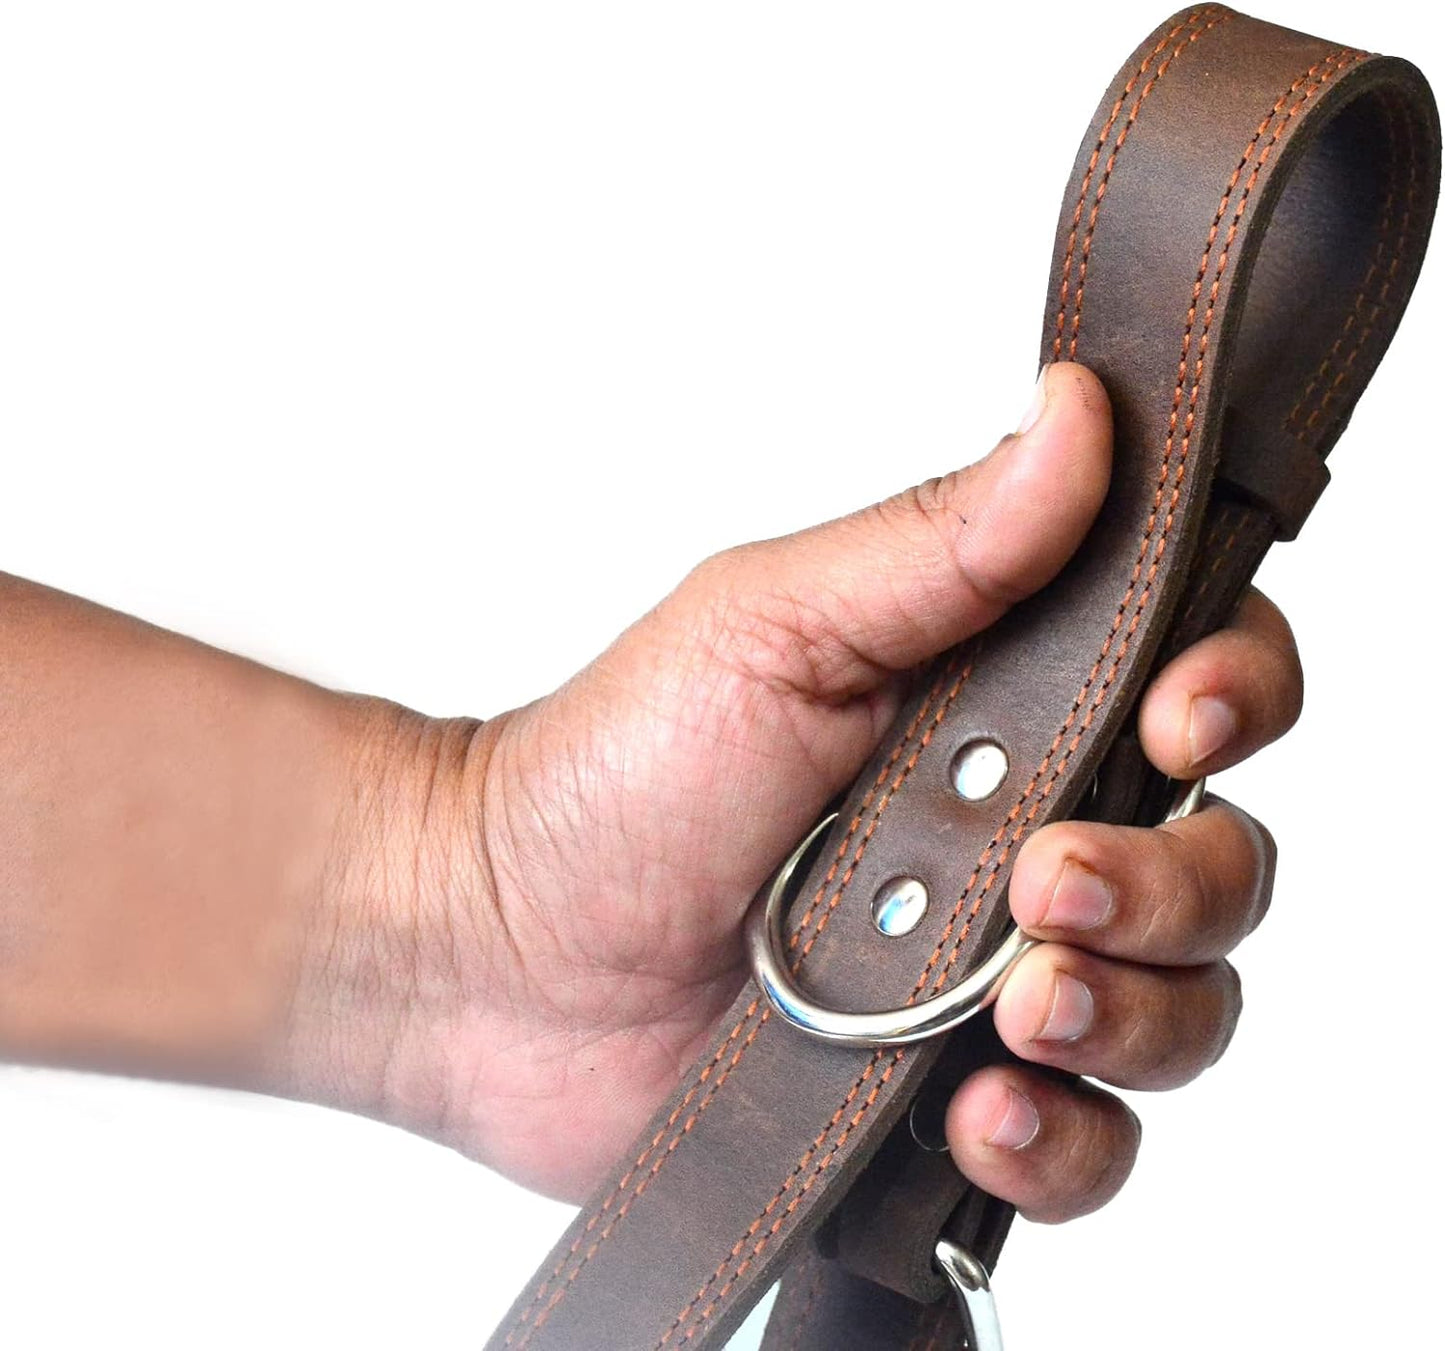 Genuine Leather Heavy Duty Dog Collar with Metal Buckle